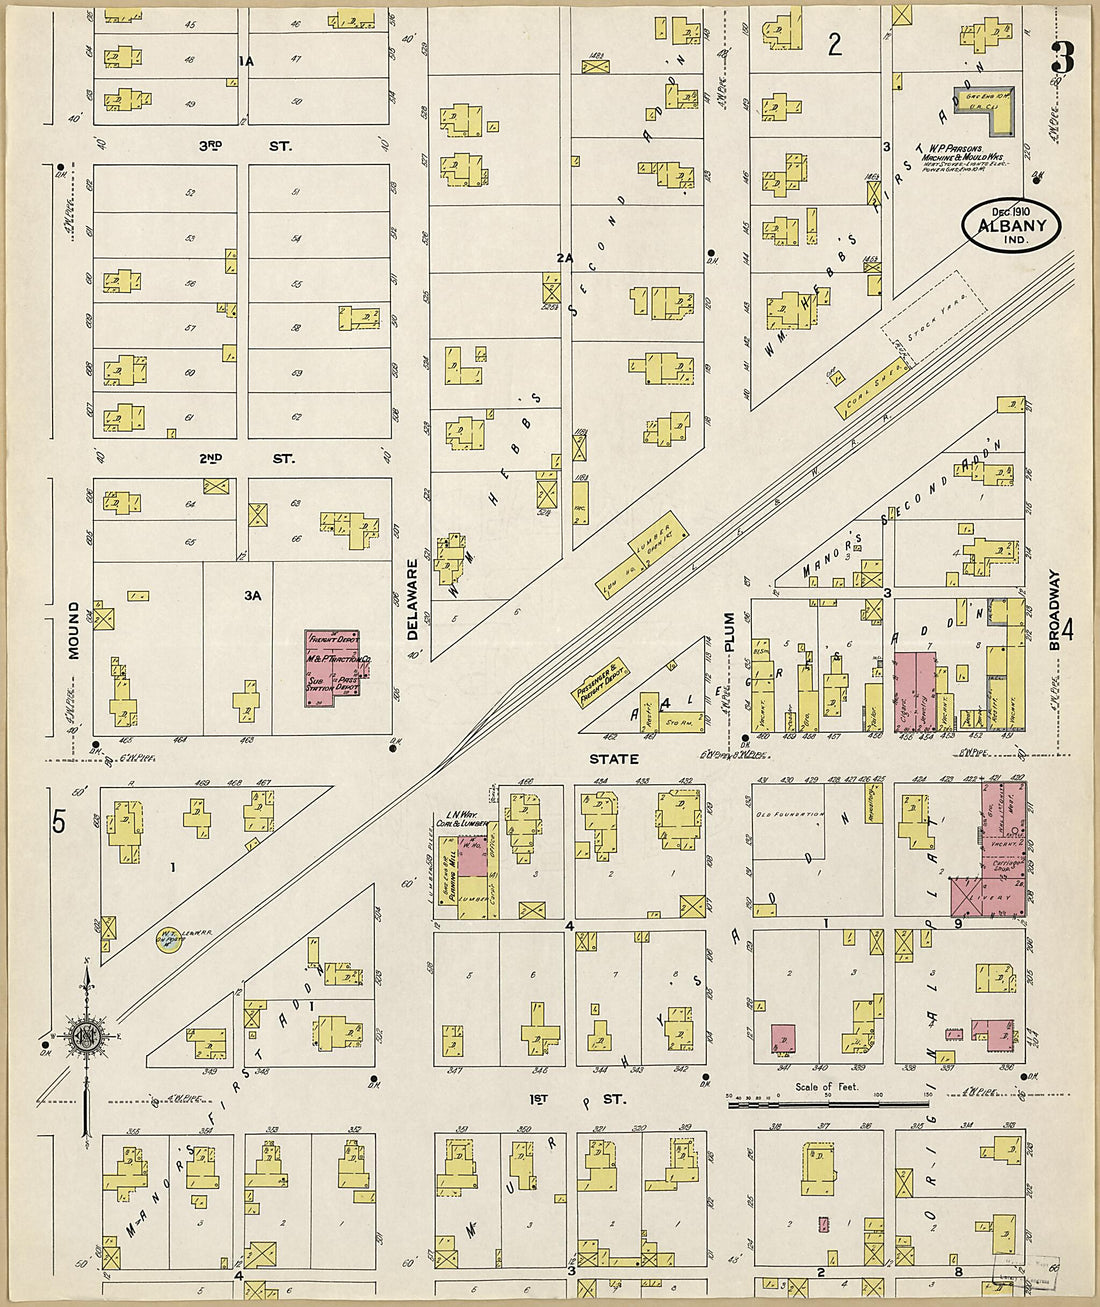 This old map of Albany, Delaware County, Indiana was created by Sanborn Map Company in 1910